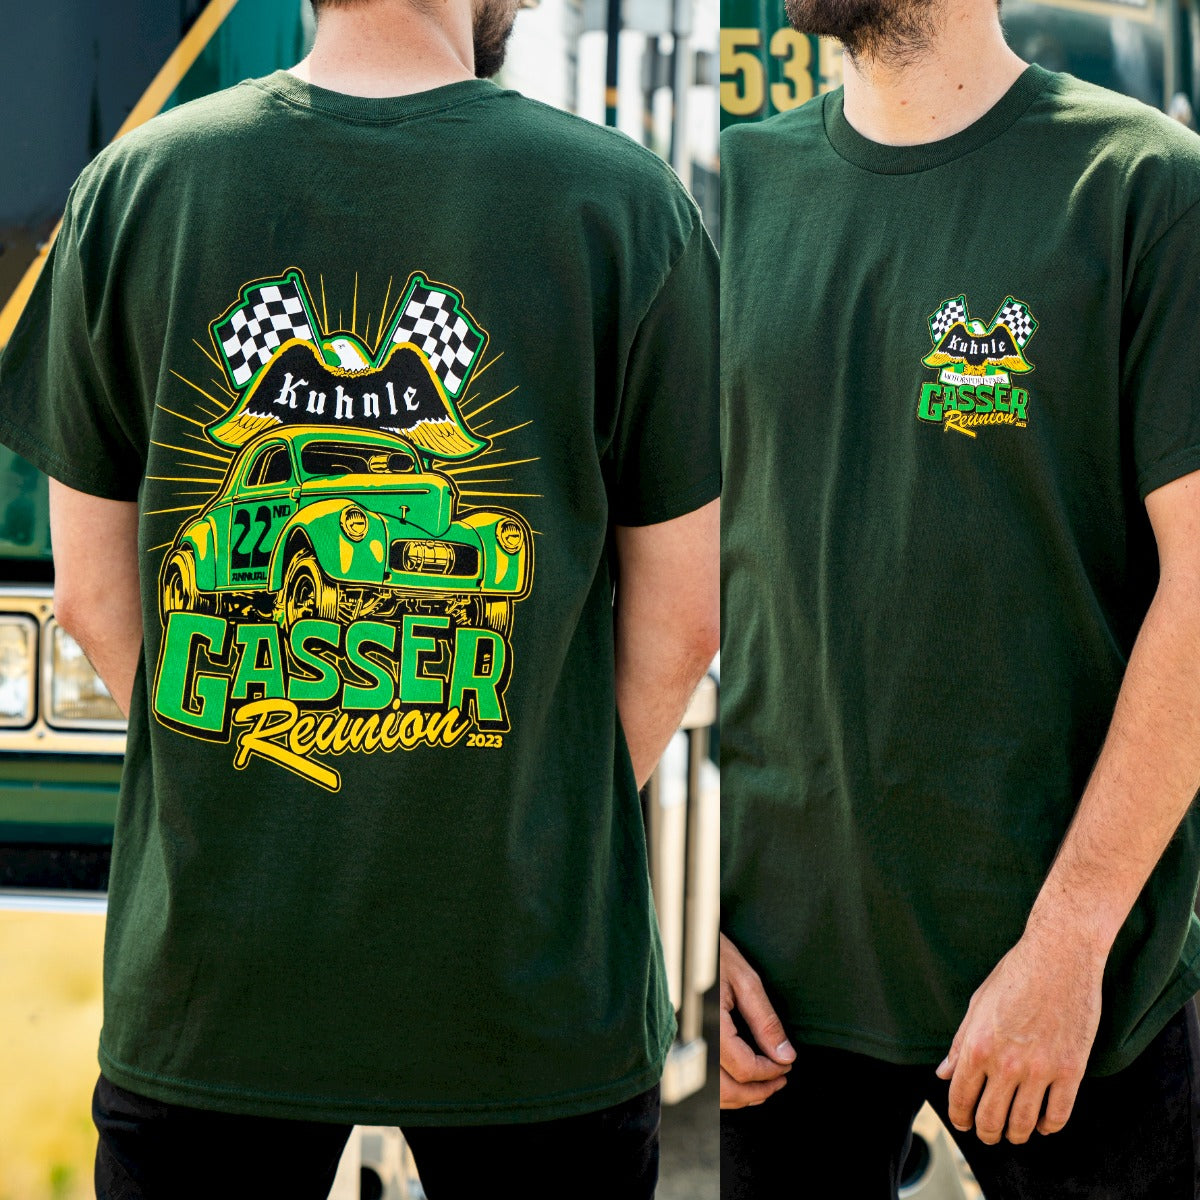 CLEARANCE - 22nd Annual Gasser Reunion Event Tee